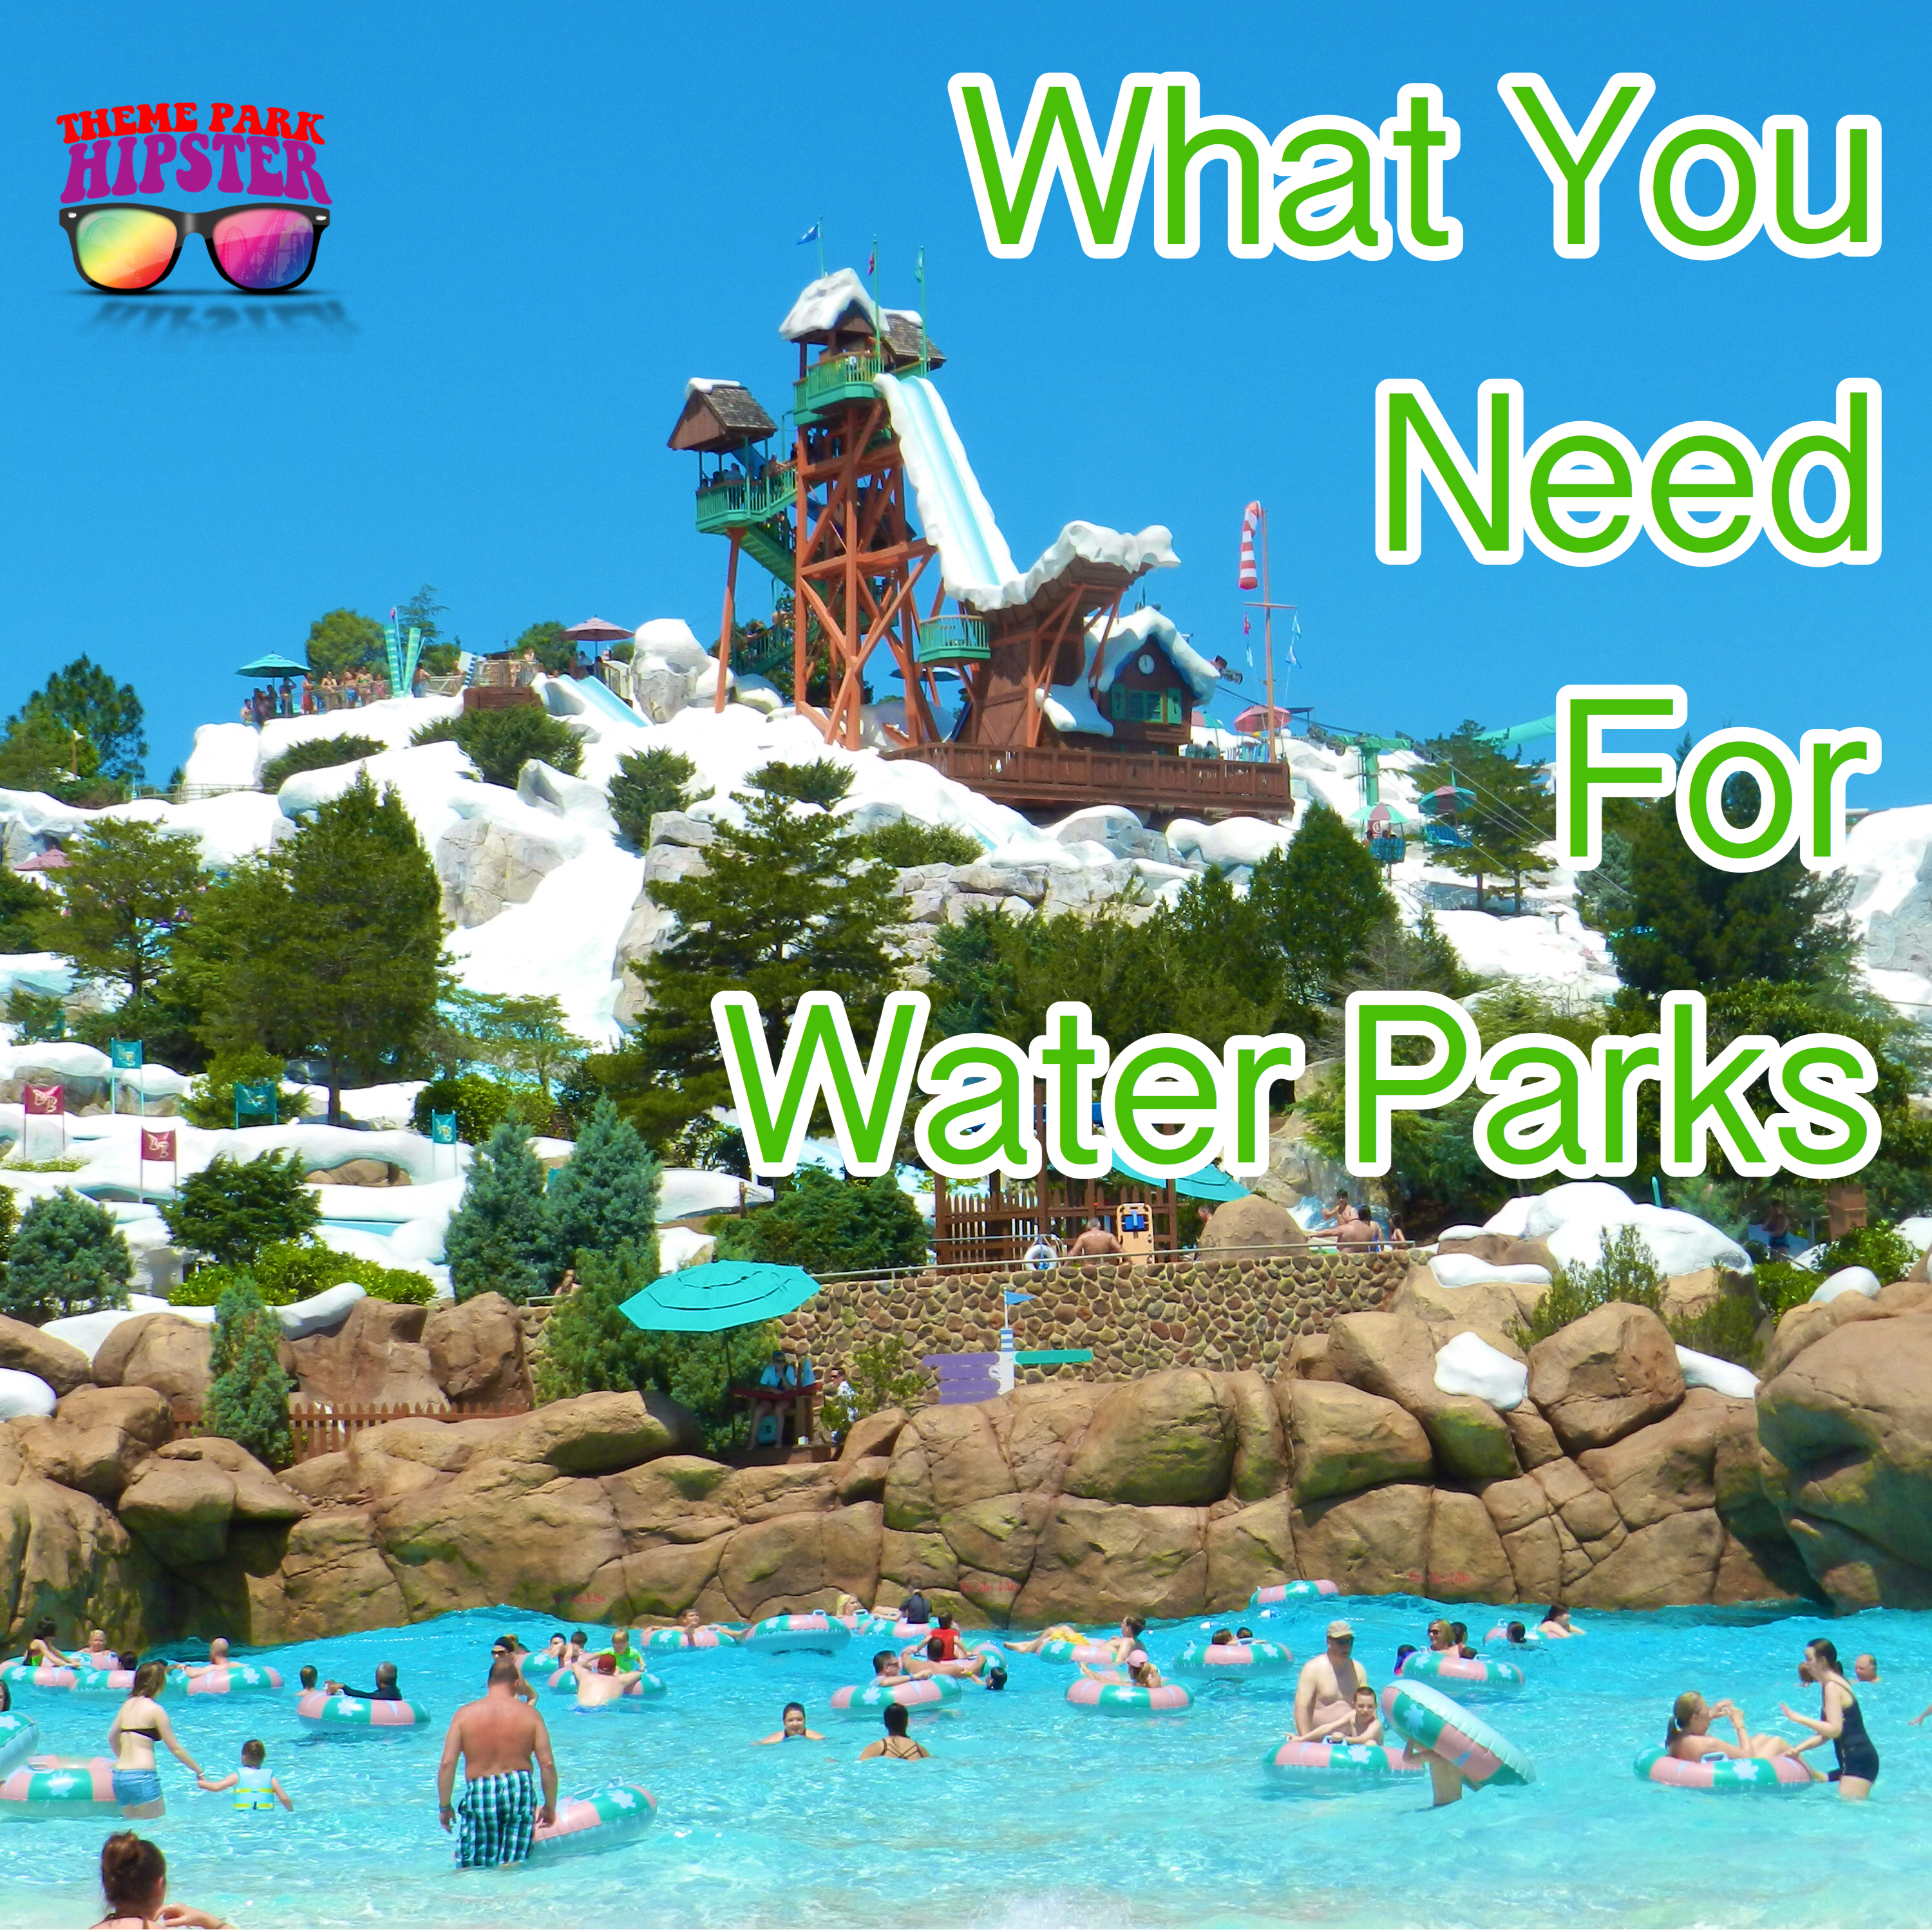 Water Park Theme Park Packing List. Keep reading to know what to pack for an amusement park and have the best theme park packing list.